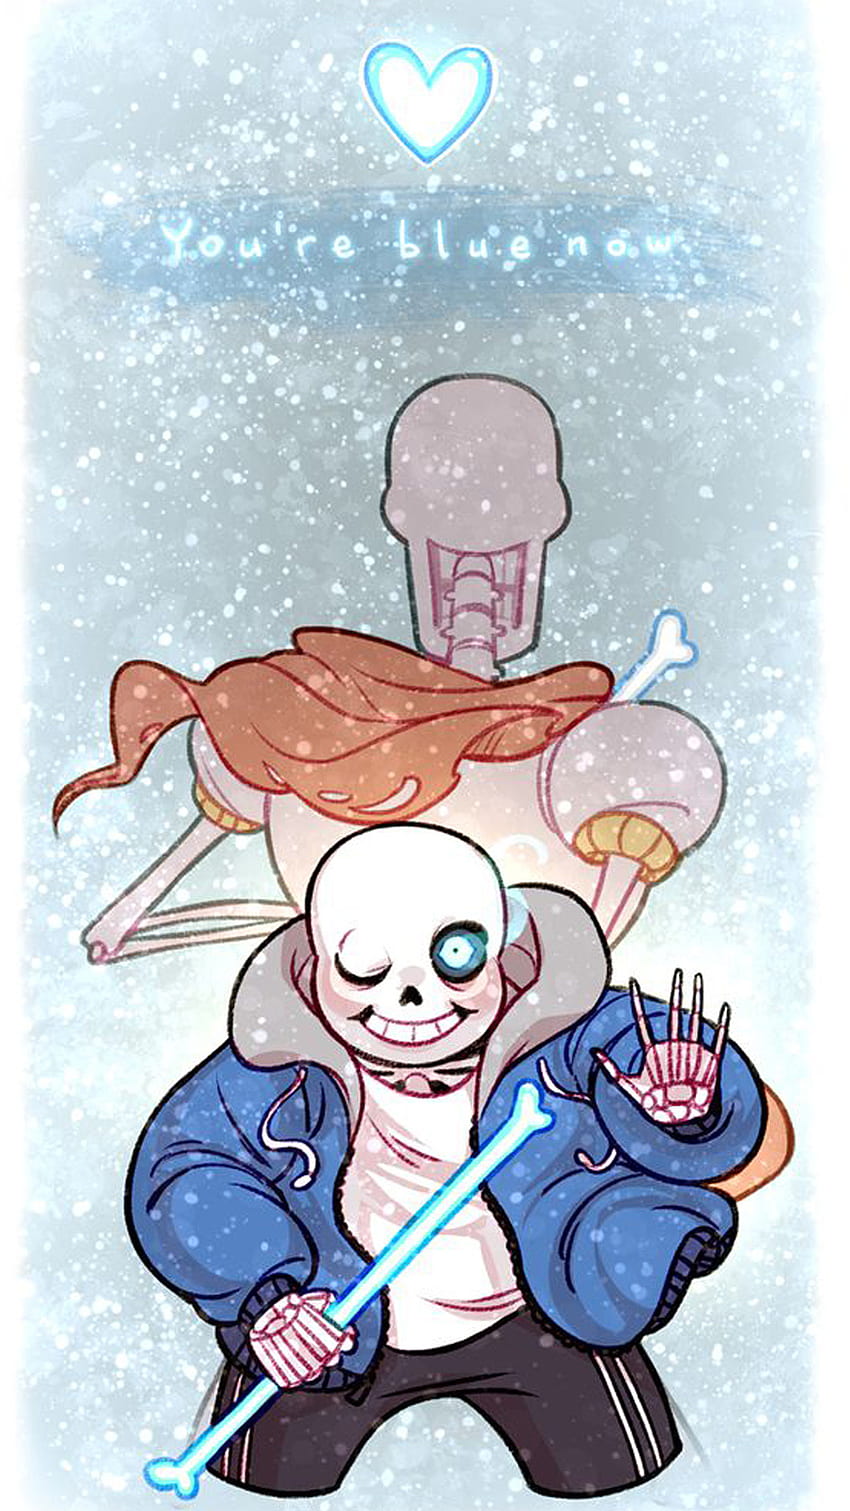 Undertale Wallpapers 71 images